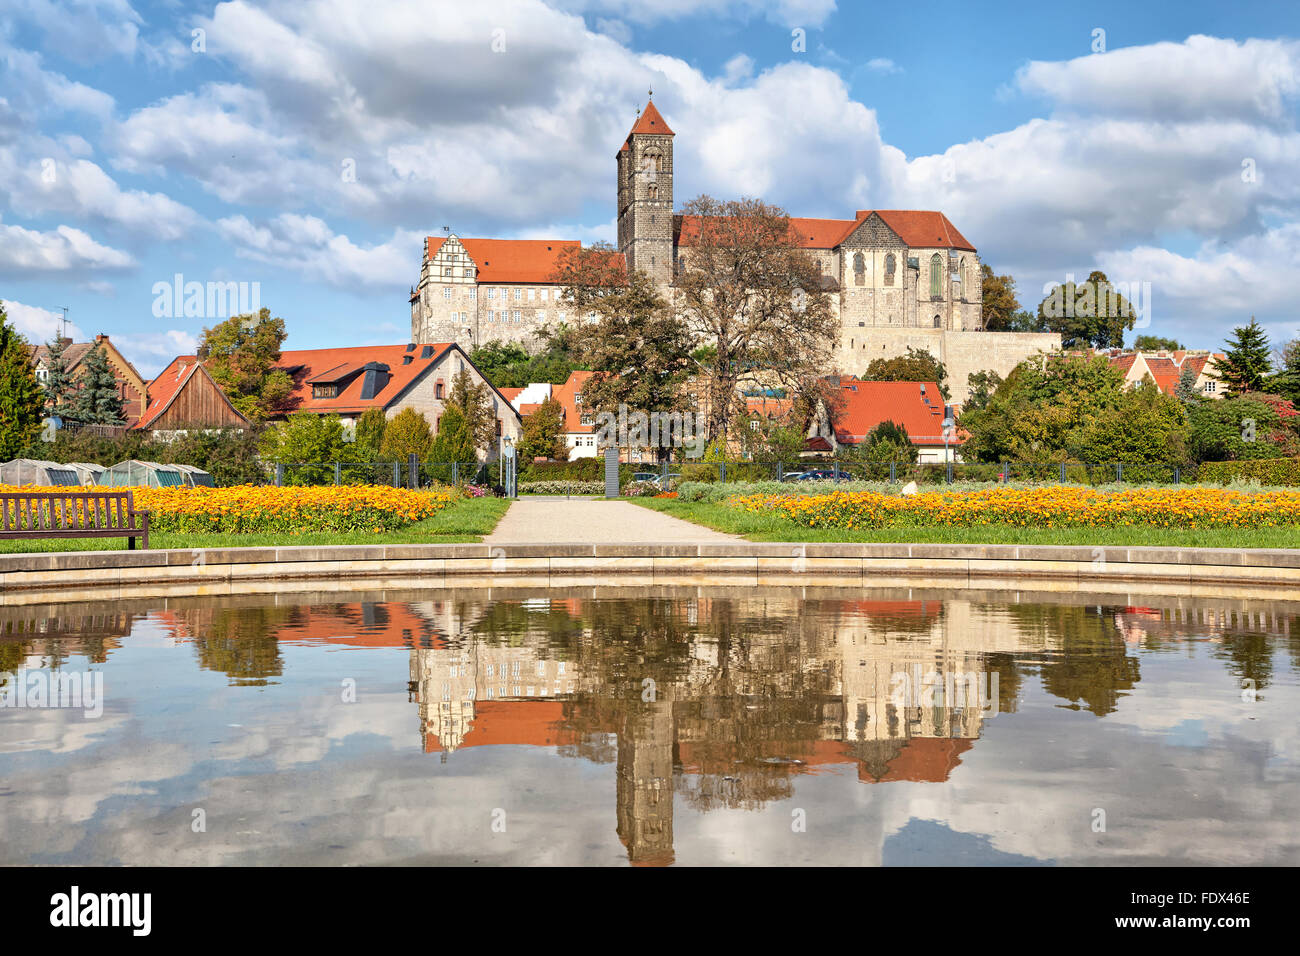 Castle and church reflecting in pond, Quedlinburg, Germany Stock Photo